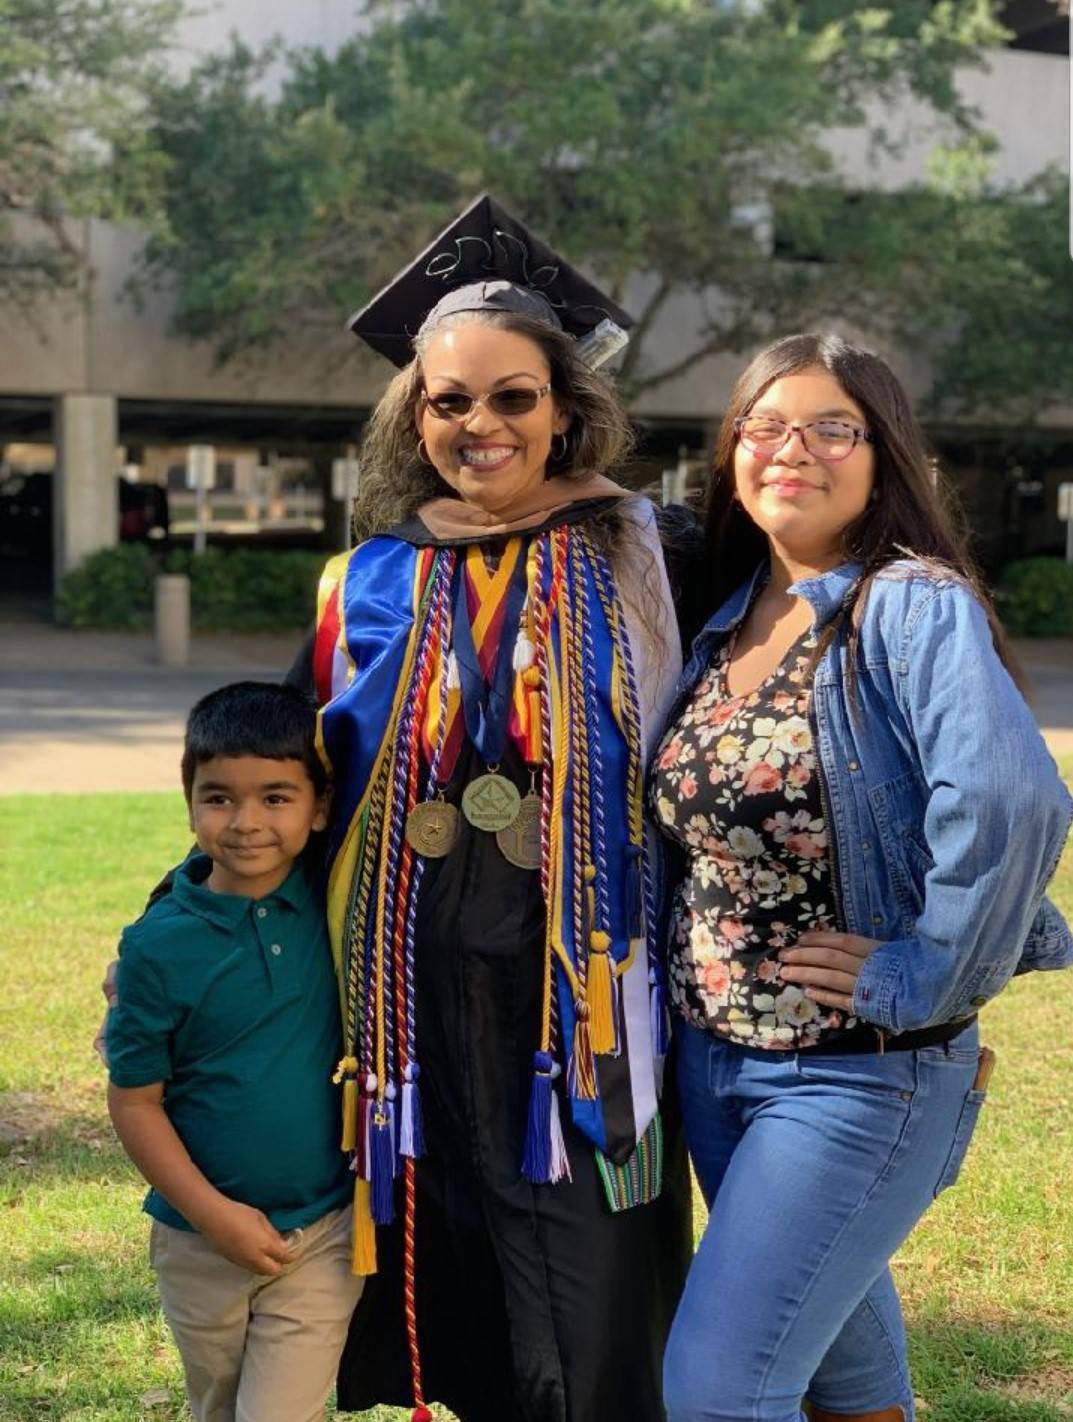 Jessica Ramos-Karmaker with her family after a commencement ceremony